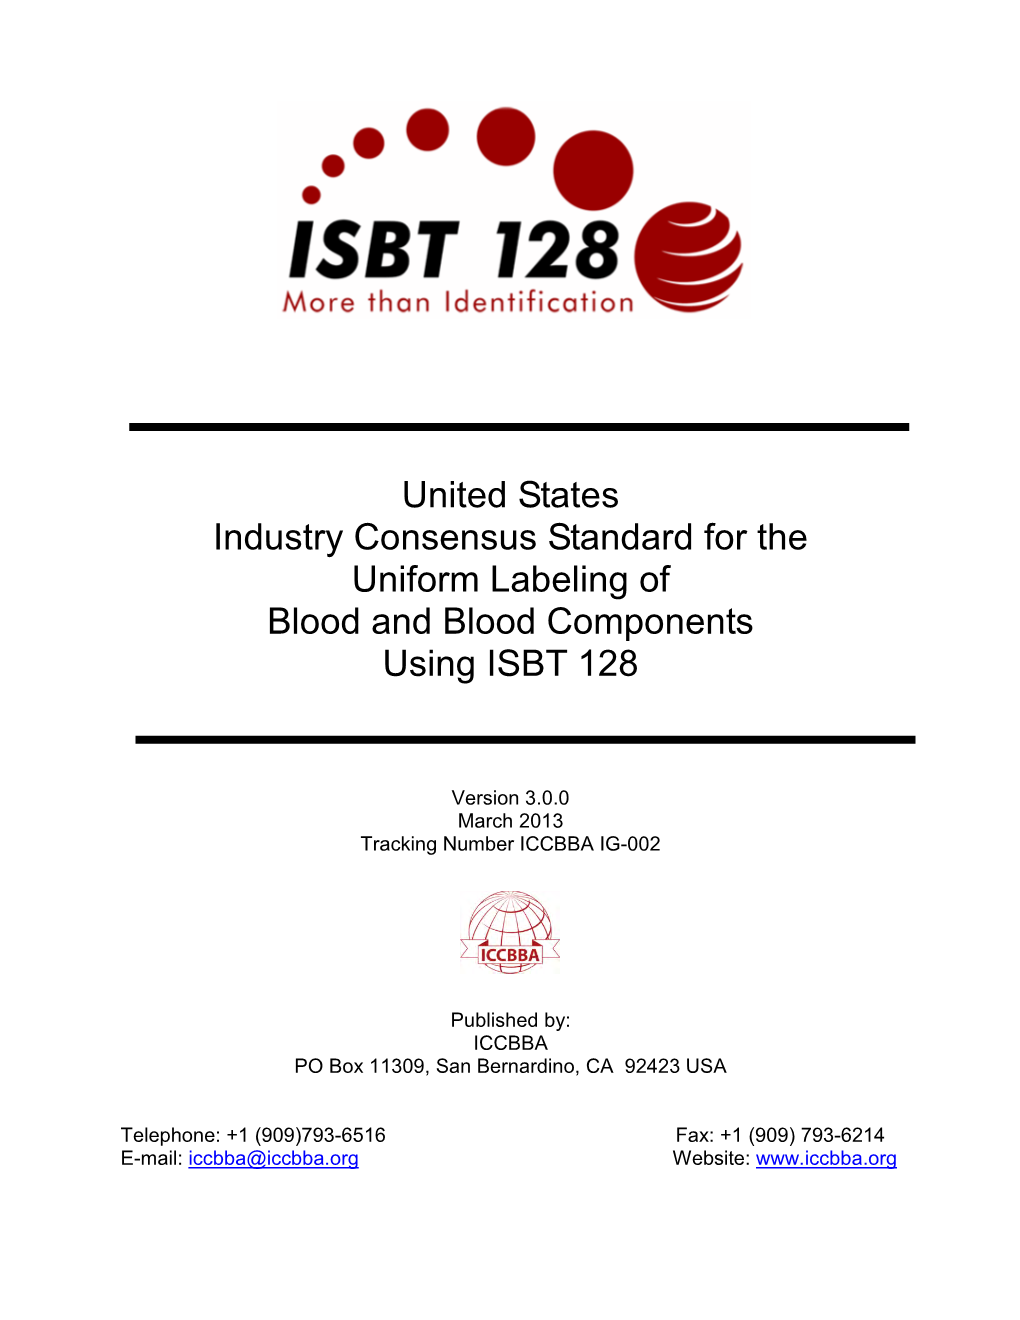 US Industry Consensus Standard for the Uniform Labeling of Blood and Blood Components Using ISBT